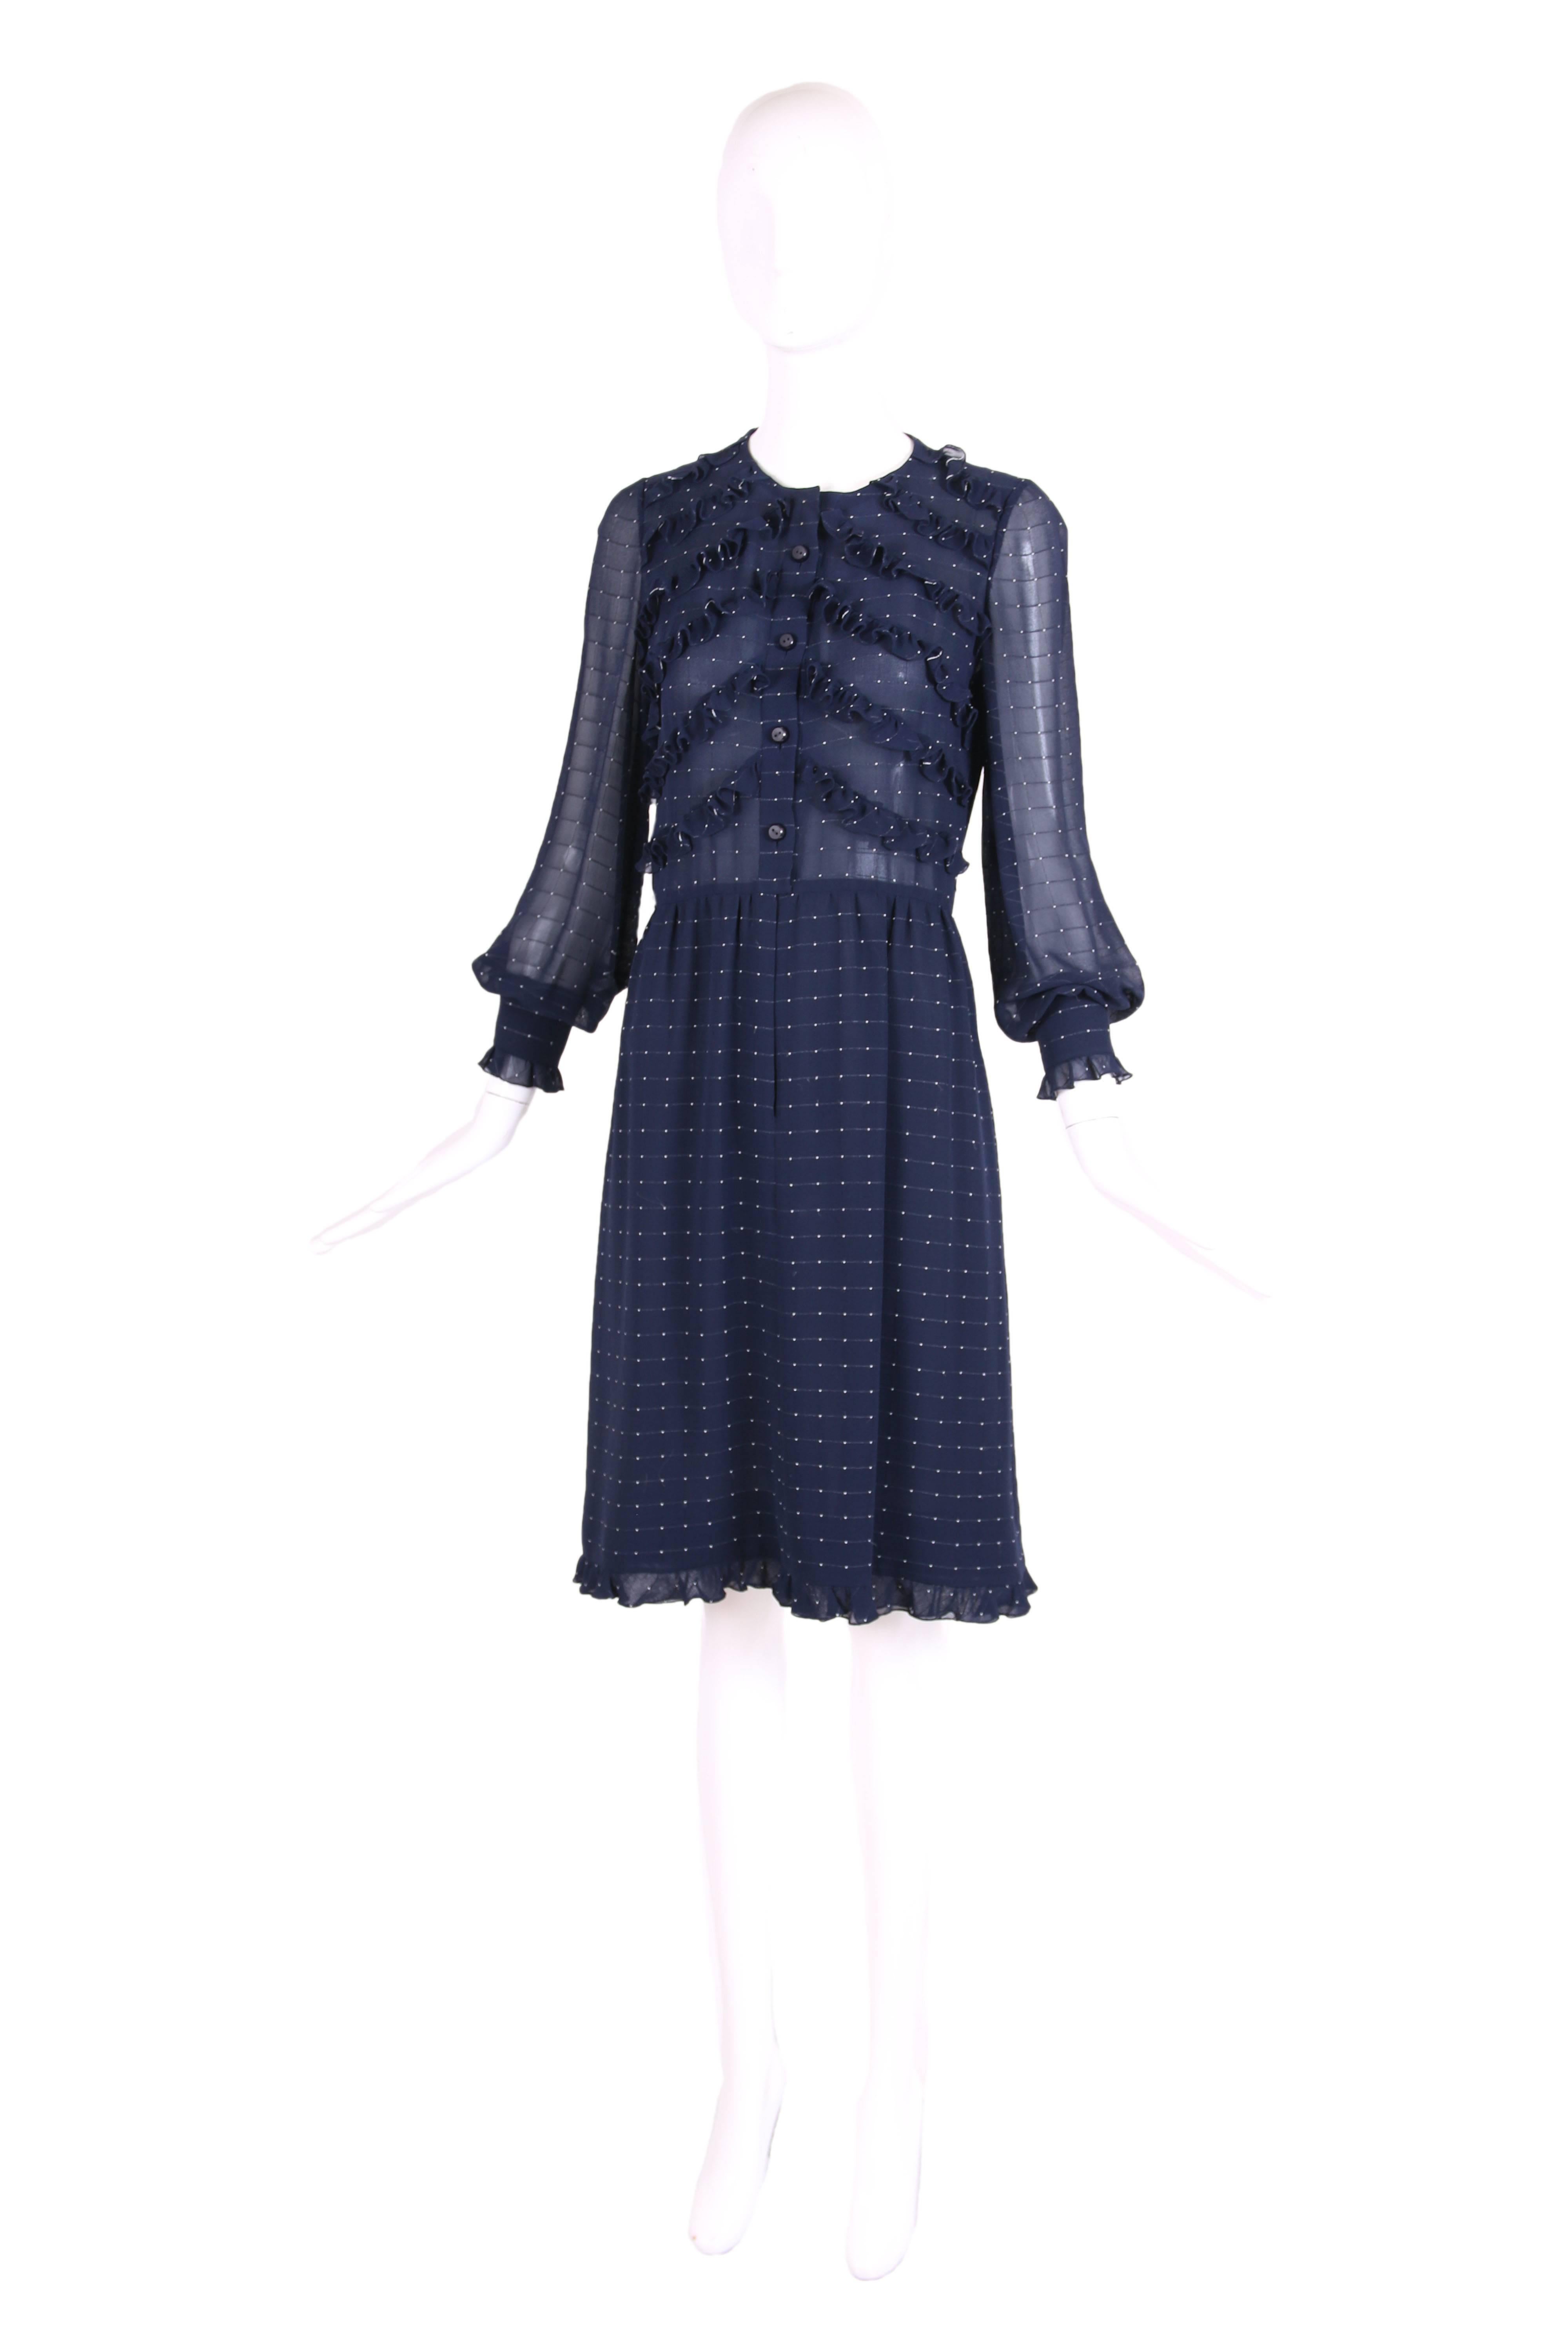 1970's Valentino Haute Couture navy blue silk ruffle trim day dress with white polka dots and long sleeves. Lined inside bottom half of dress. In excellent condition. Snaps at the interior collar indicate there may once have been a detachable collar